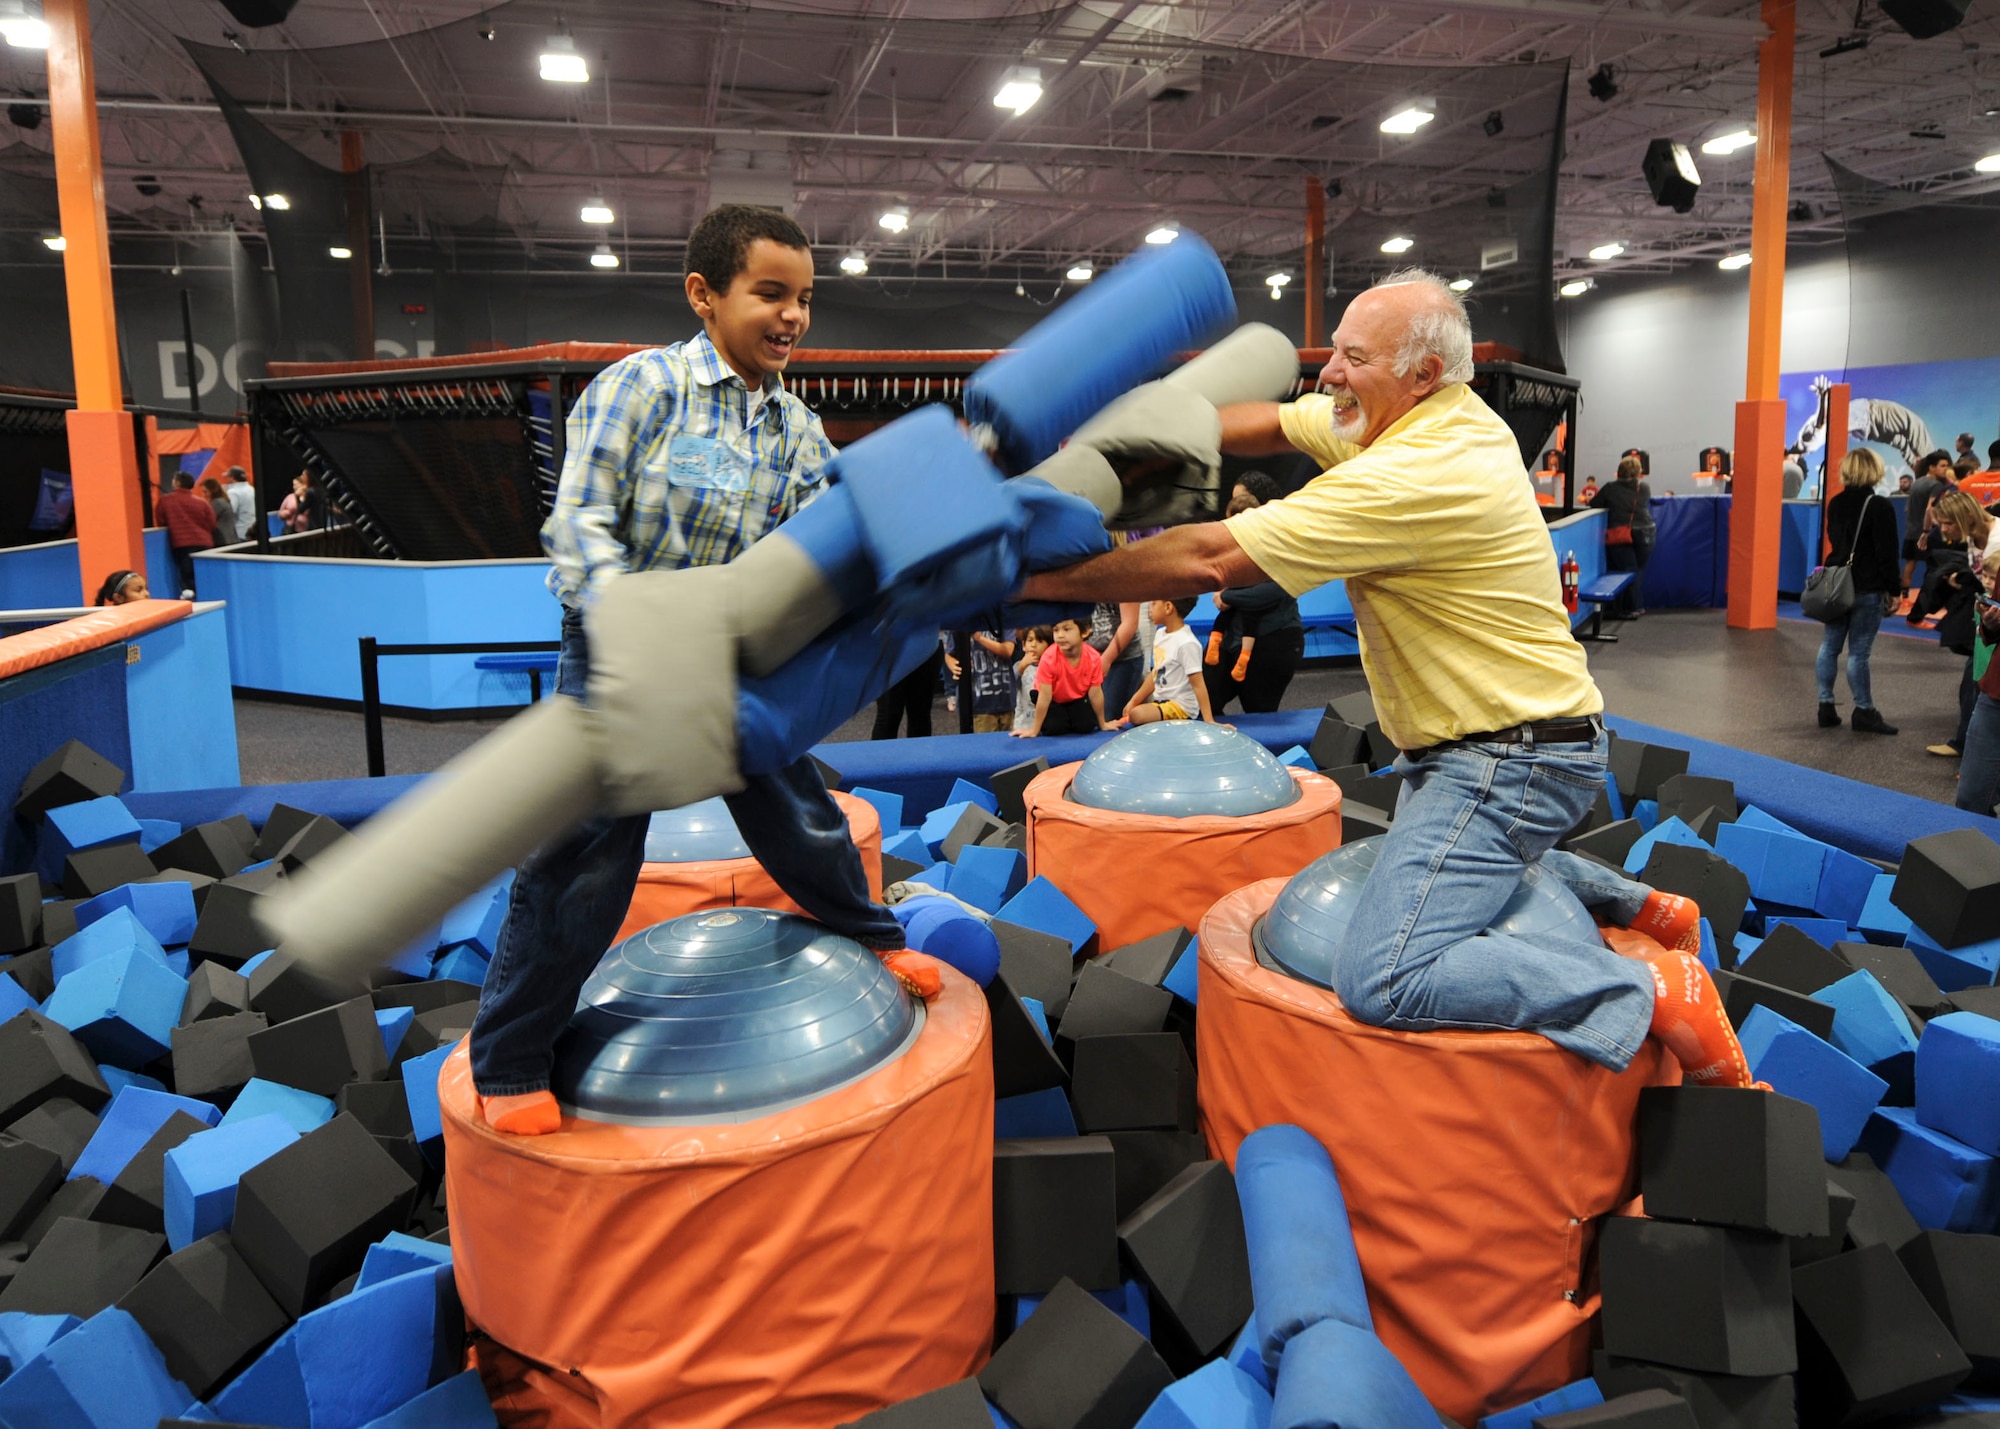 Families of deployed Air Commandos enjoy a Hearts Apart event at the Sky Zone in Pensacola, Fla., Jan. 28, 2017. The Hurlburt Airman and Family Readiness Center hosts monthly events for families of deployed Air Commandos to engage and make connections for morale support. (U.S. Air Force photo by Senior Airman Kasie P. Whitfield)